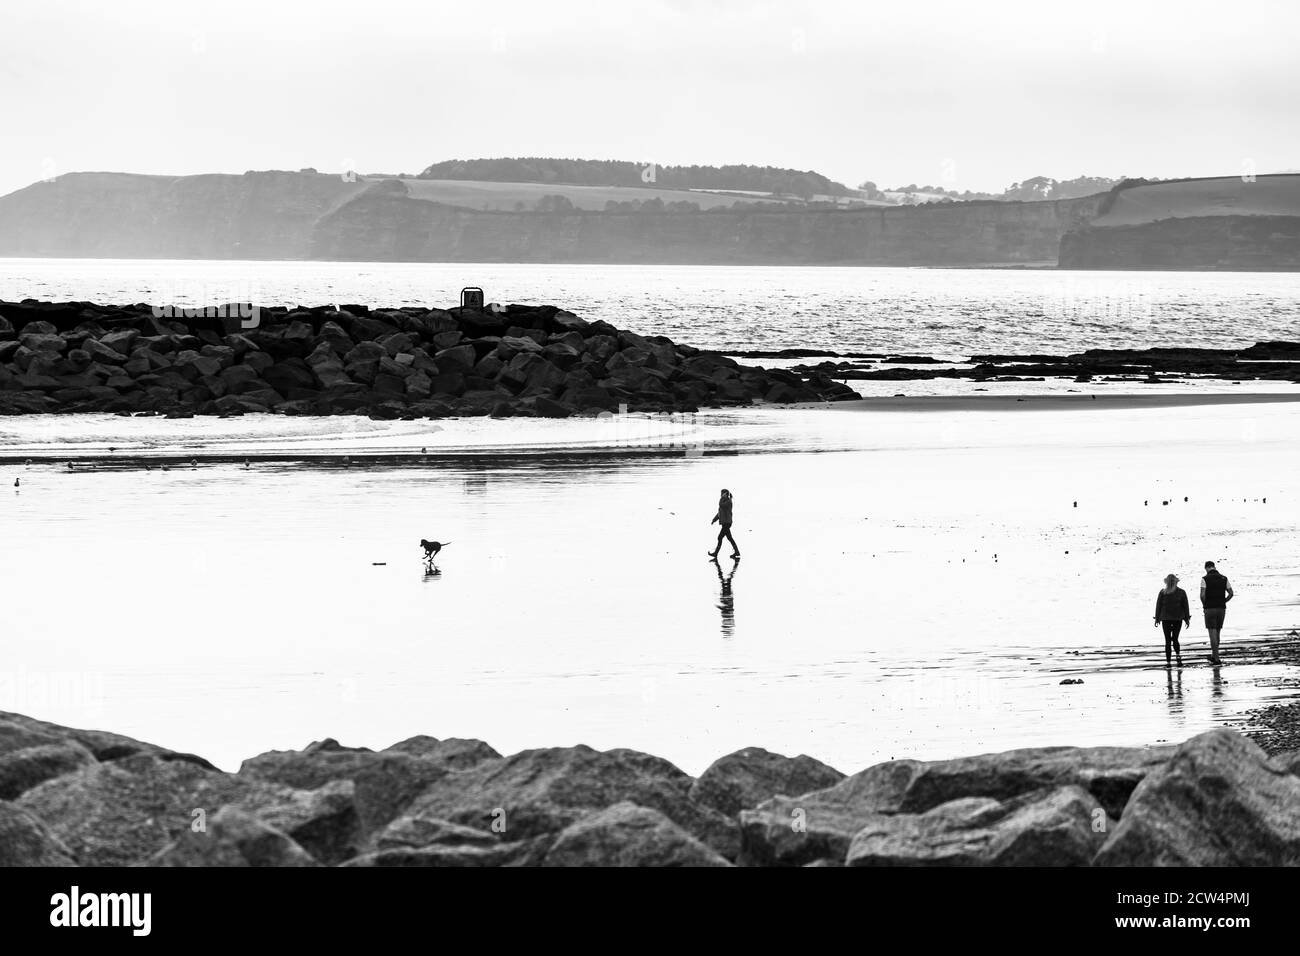 Image of sidmouth Black and White Stock Photos & Images - Alamy